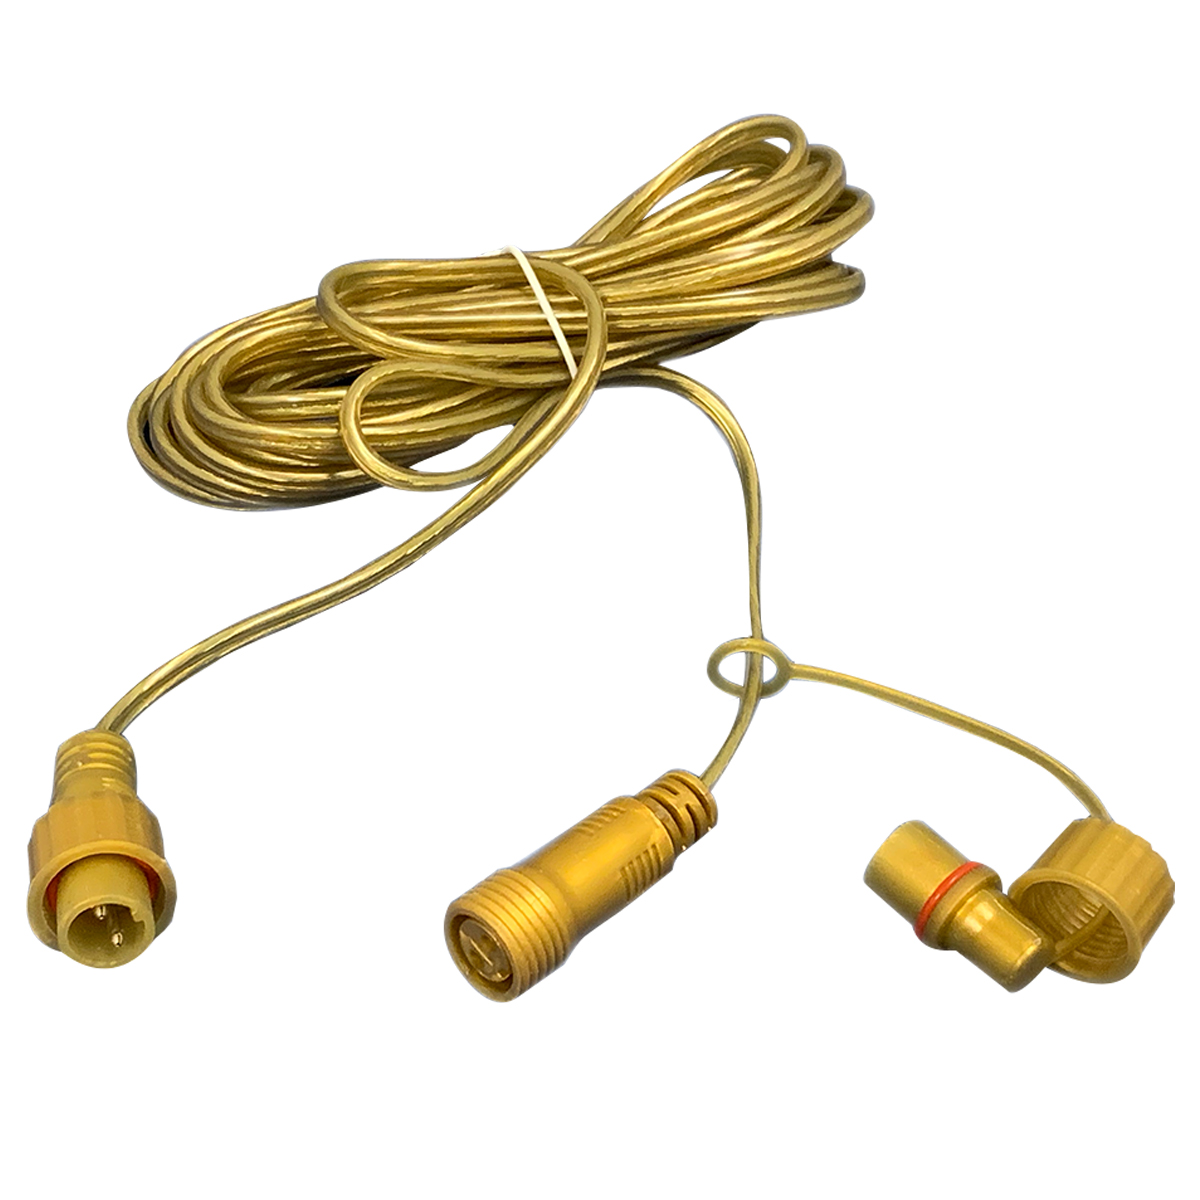 Extension Cable for PVC Christmas Light Strand - 197” - Gold